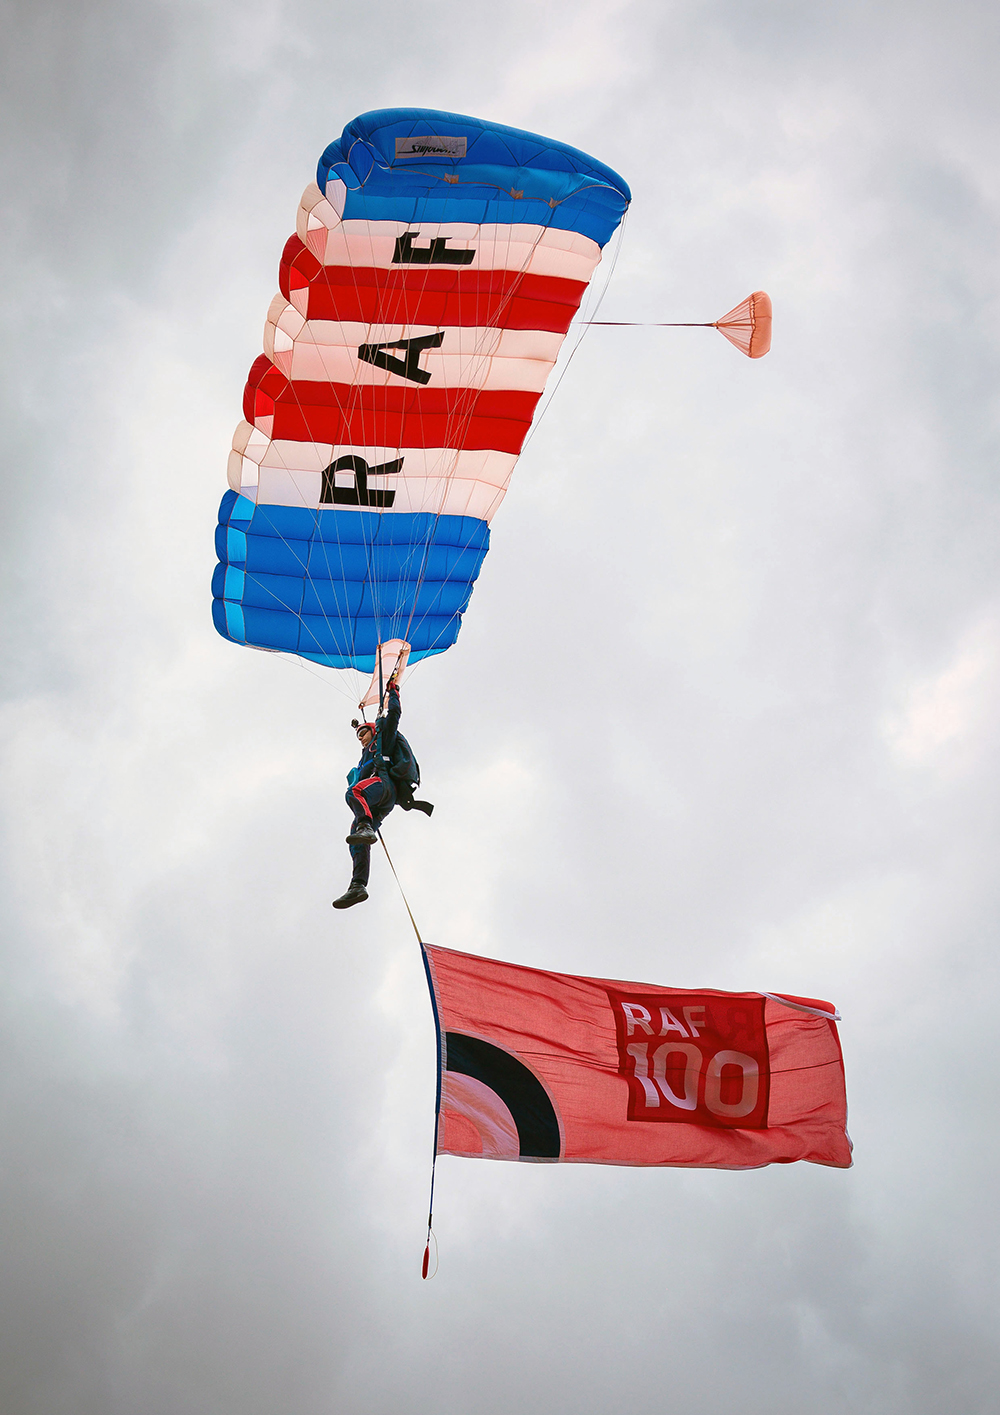 Sergeant Lee Coonan jumps with the RAF100 flag for the 2018 display season